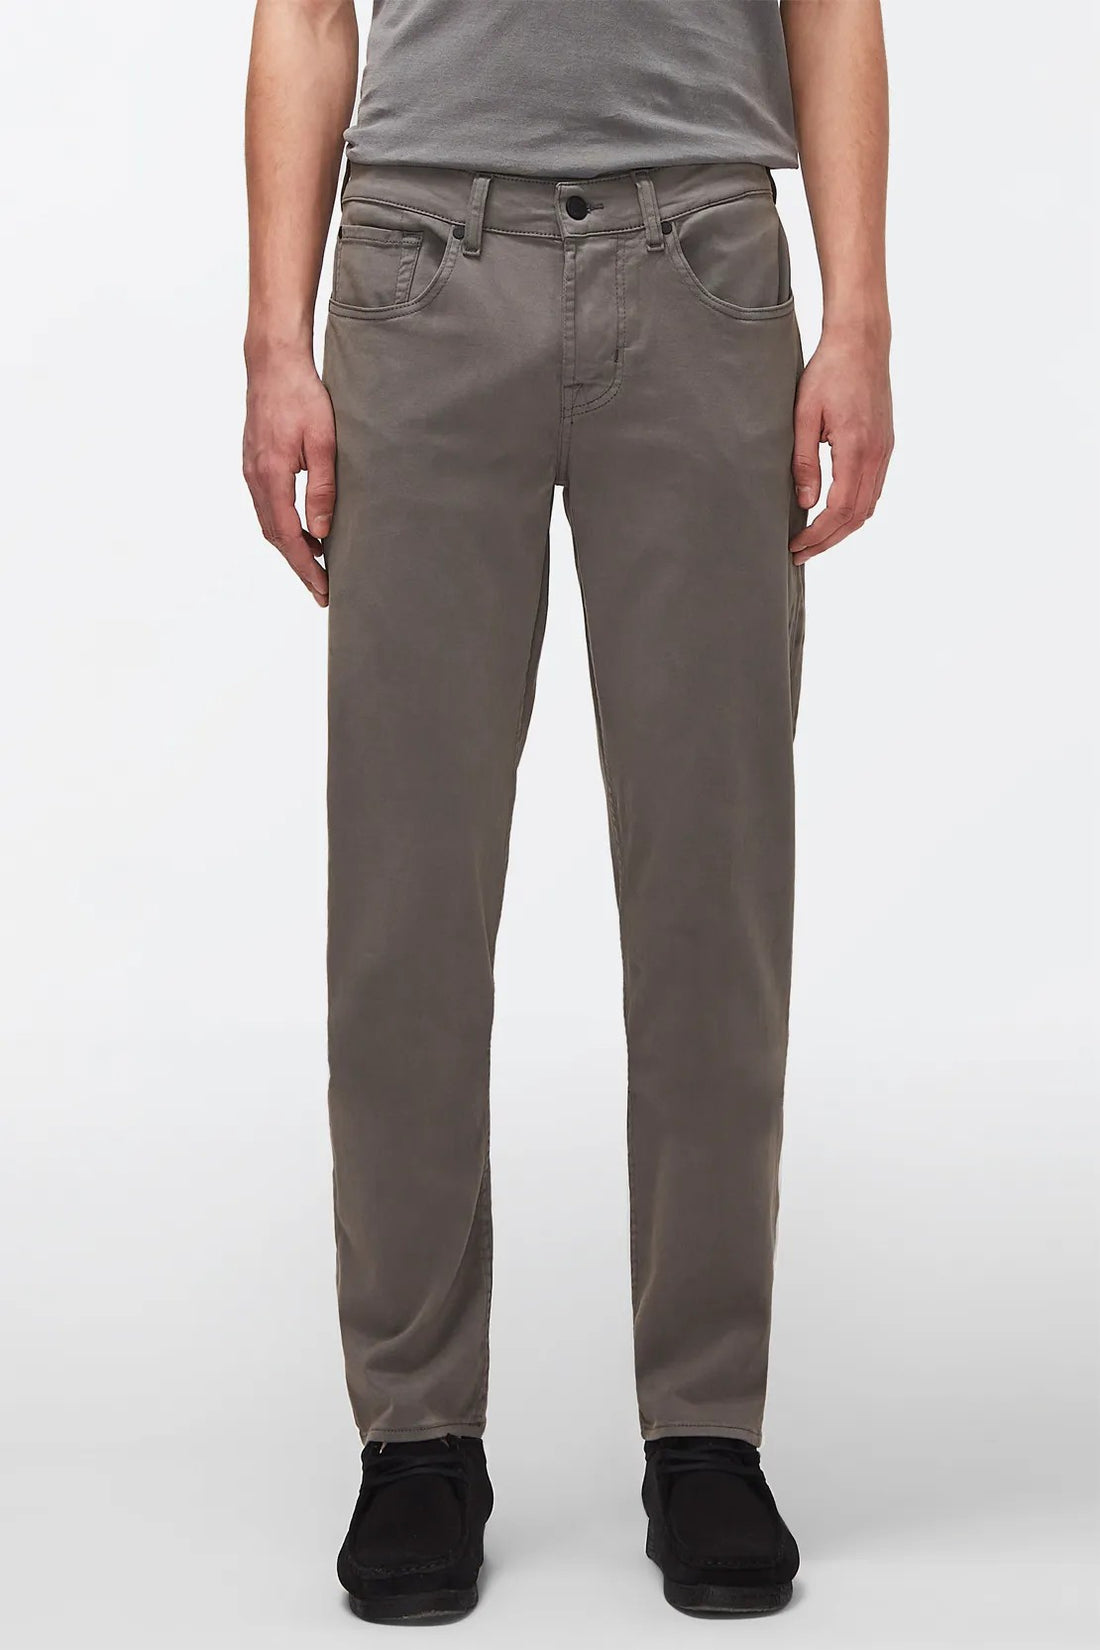 Slimmy Tapered Luxe Performance Plus Color Grey